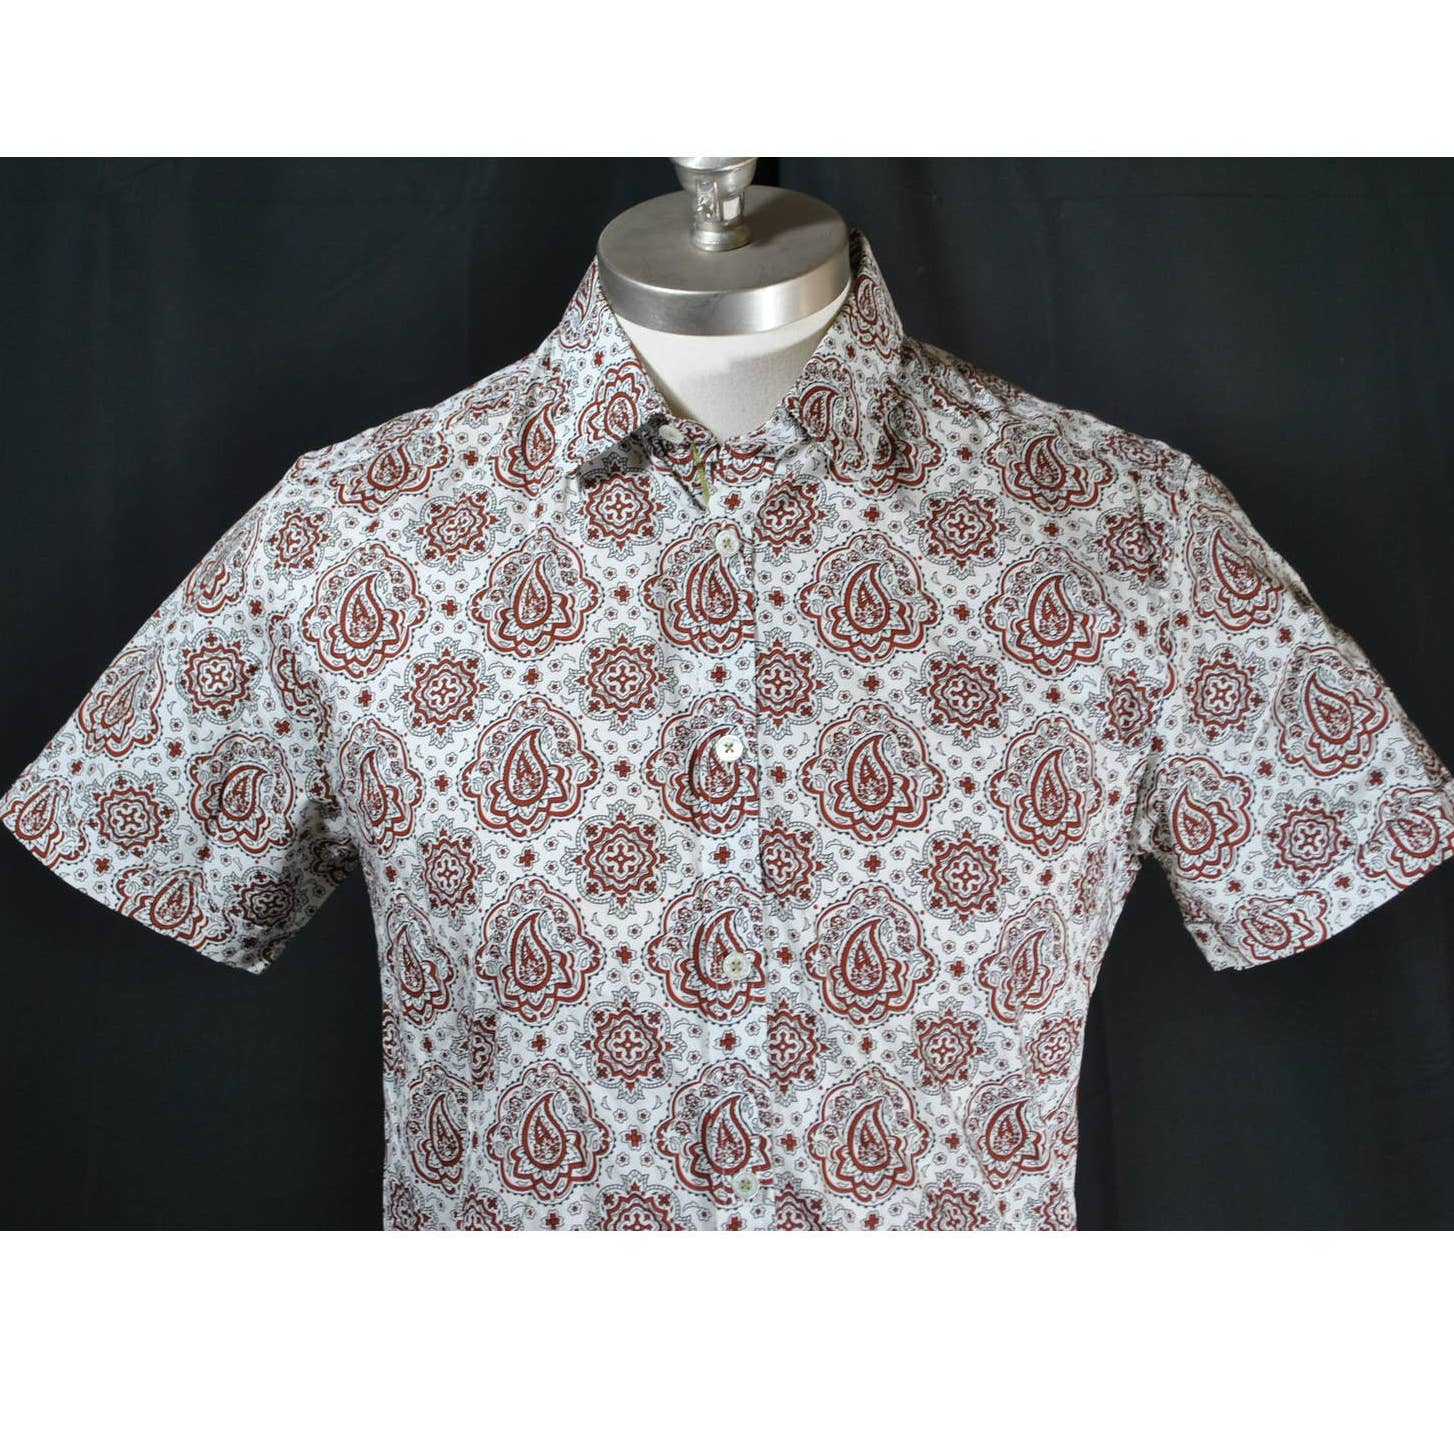 Ted Baker White Maroon Paisley Short Sleeve Button Up Shirt -3 (M)